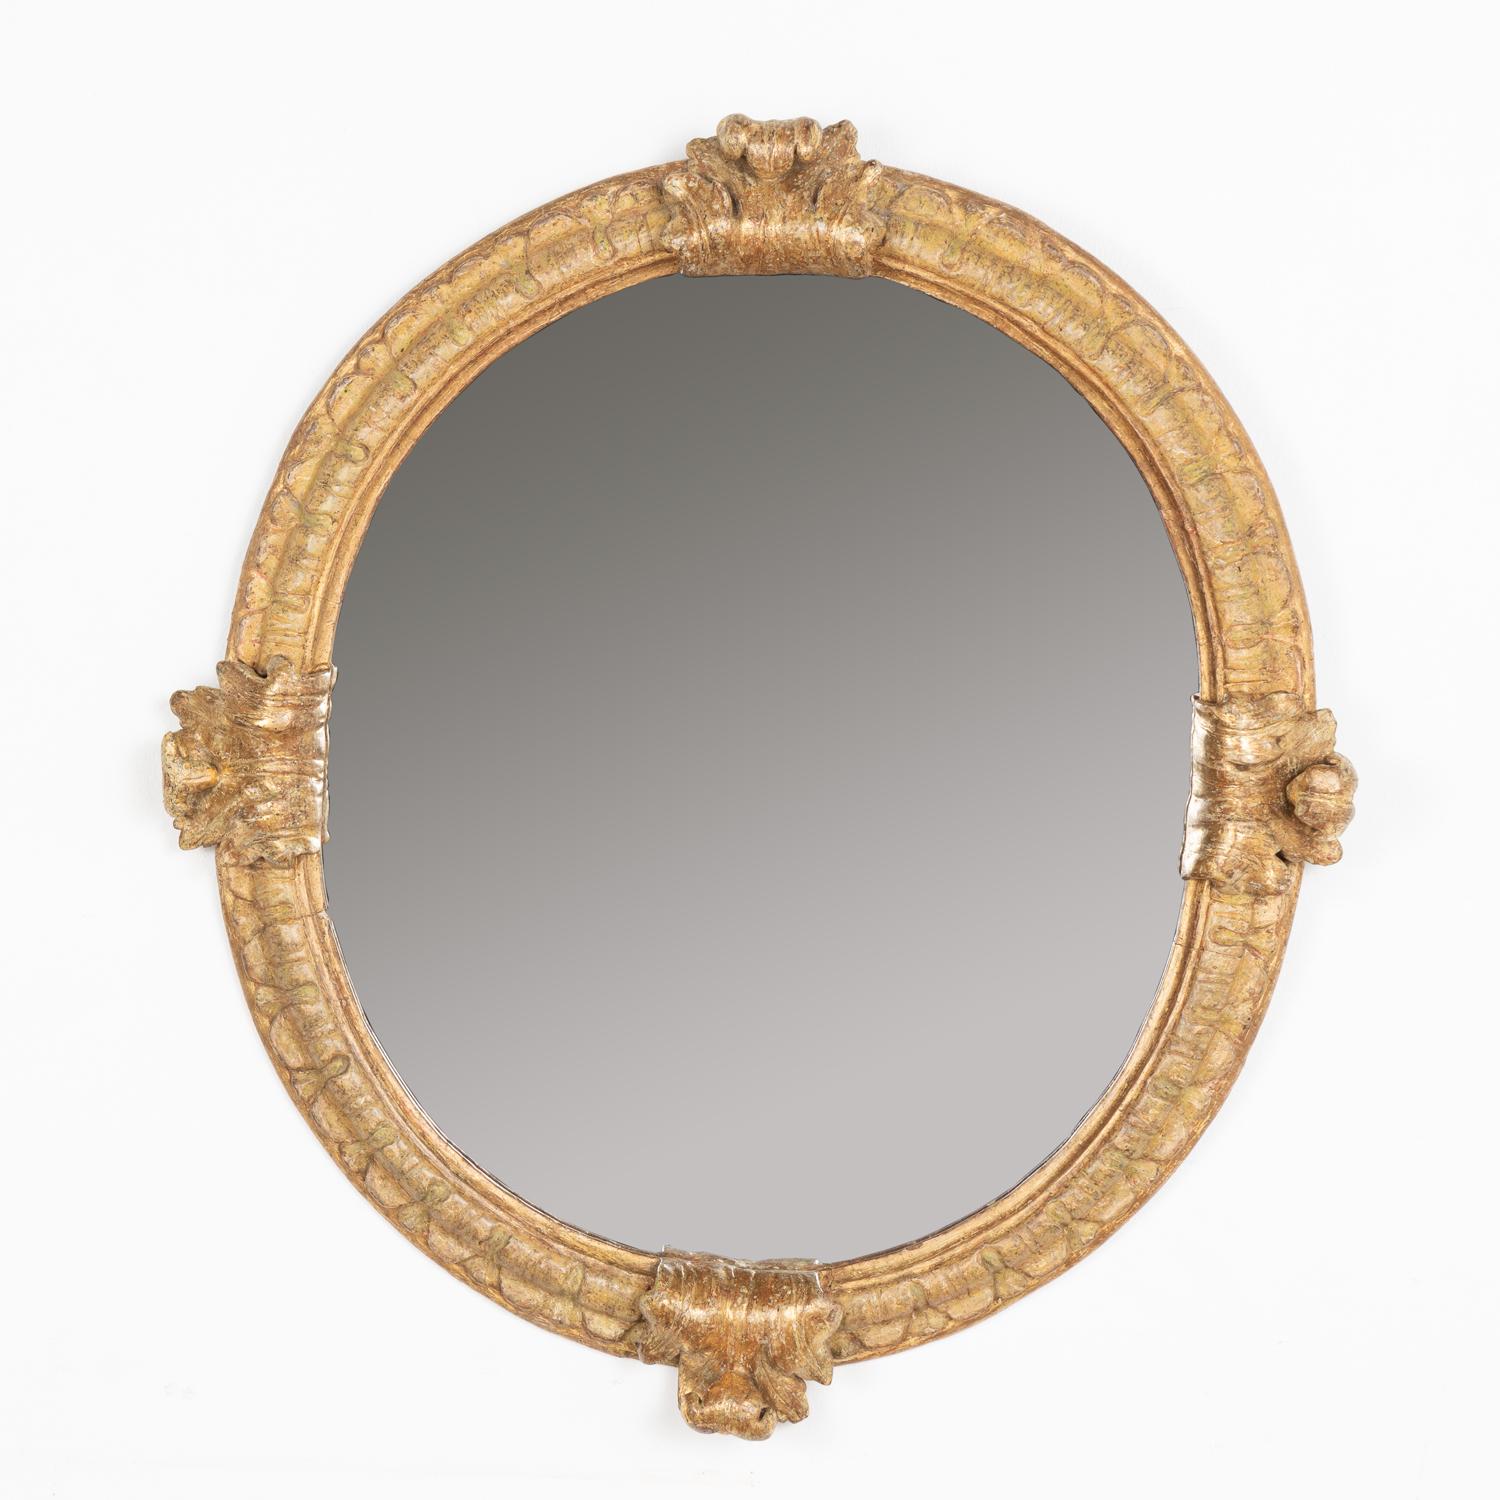 This impressive gold gilt mirror has four dramatic carved flourishes accenting the slightly oval frame.
There is expected age-related wear as seen where the gilt has been worn off, wood is nicked or cracked but wear does not impact the beauty nor